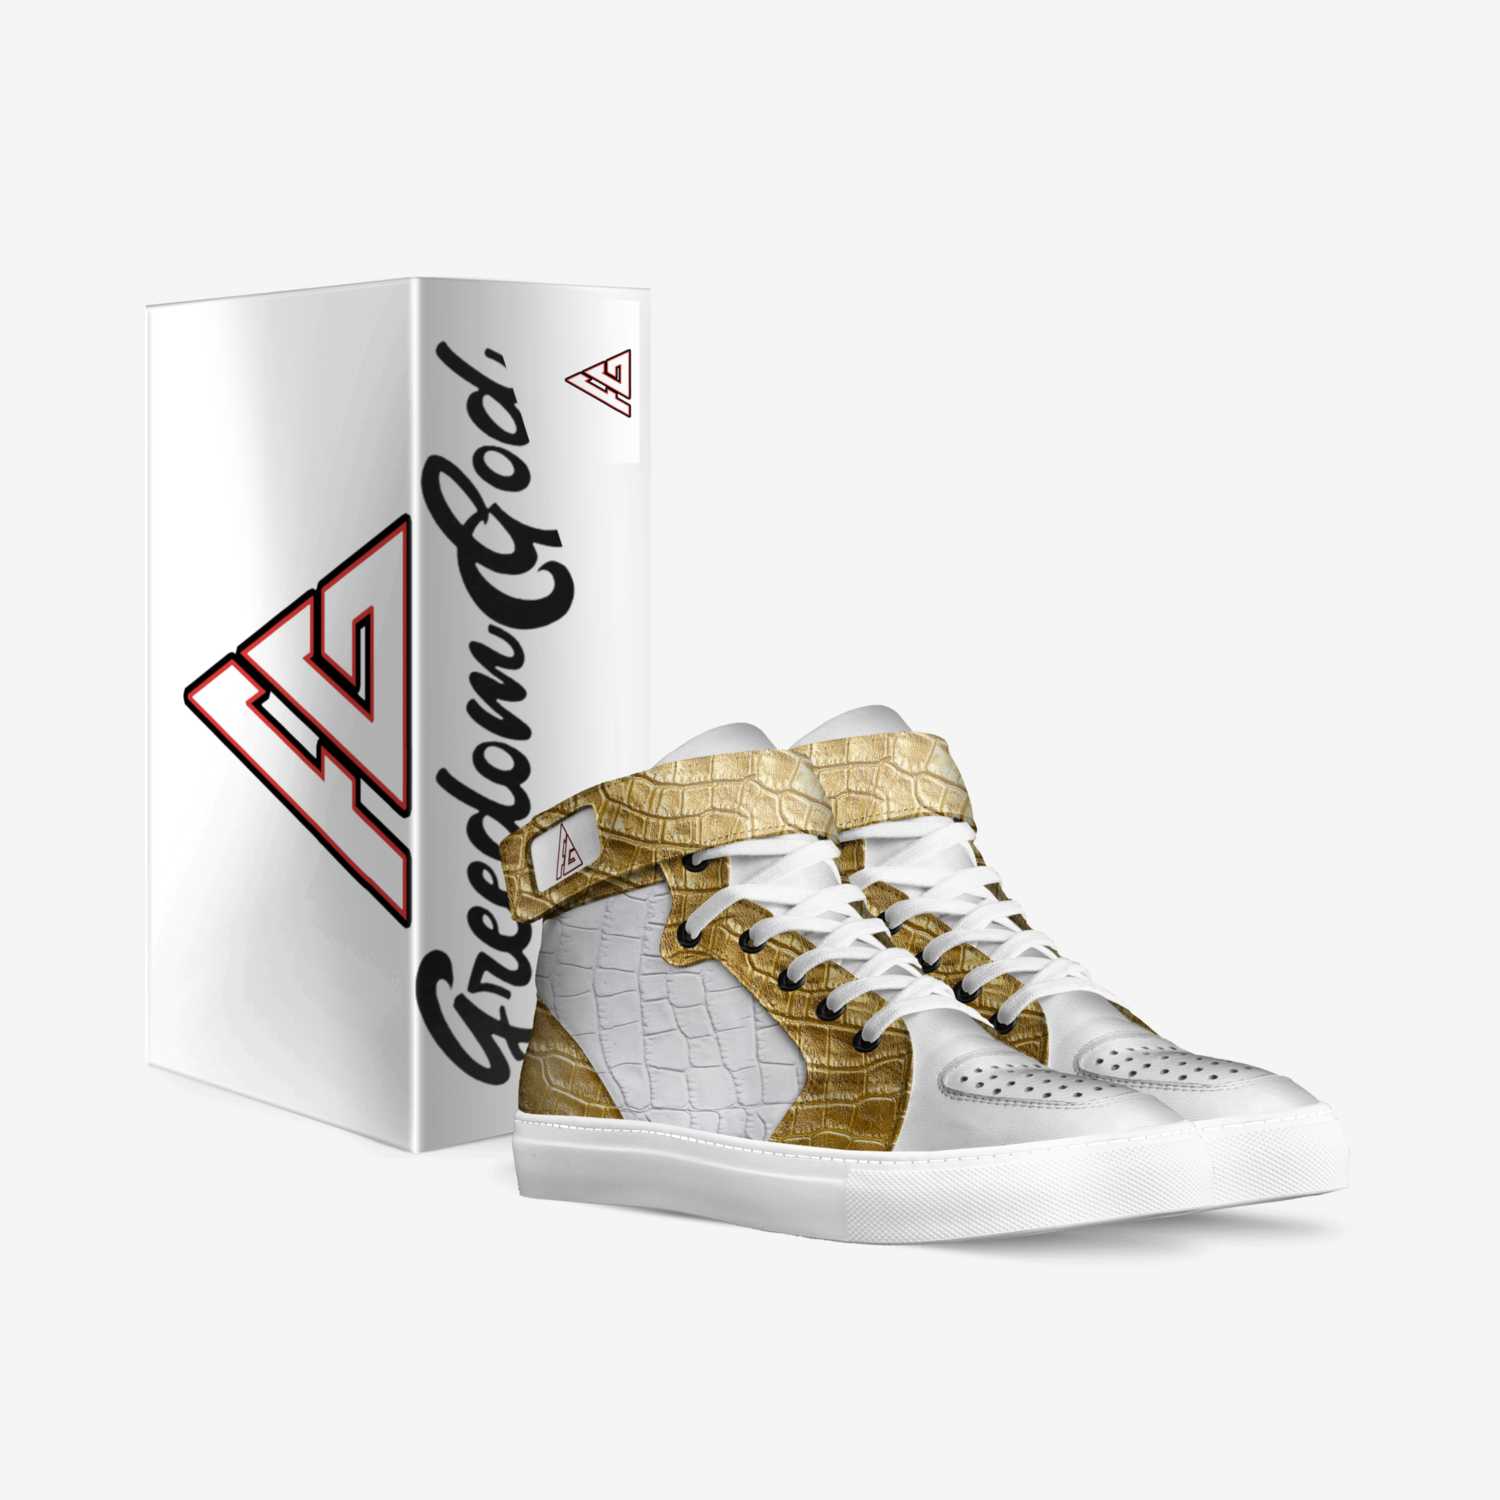 FreedomGod custom made in Italy shoes by Hassan White | Box view